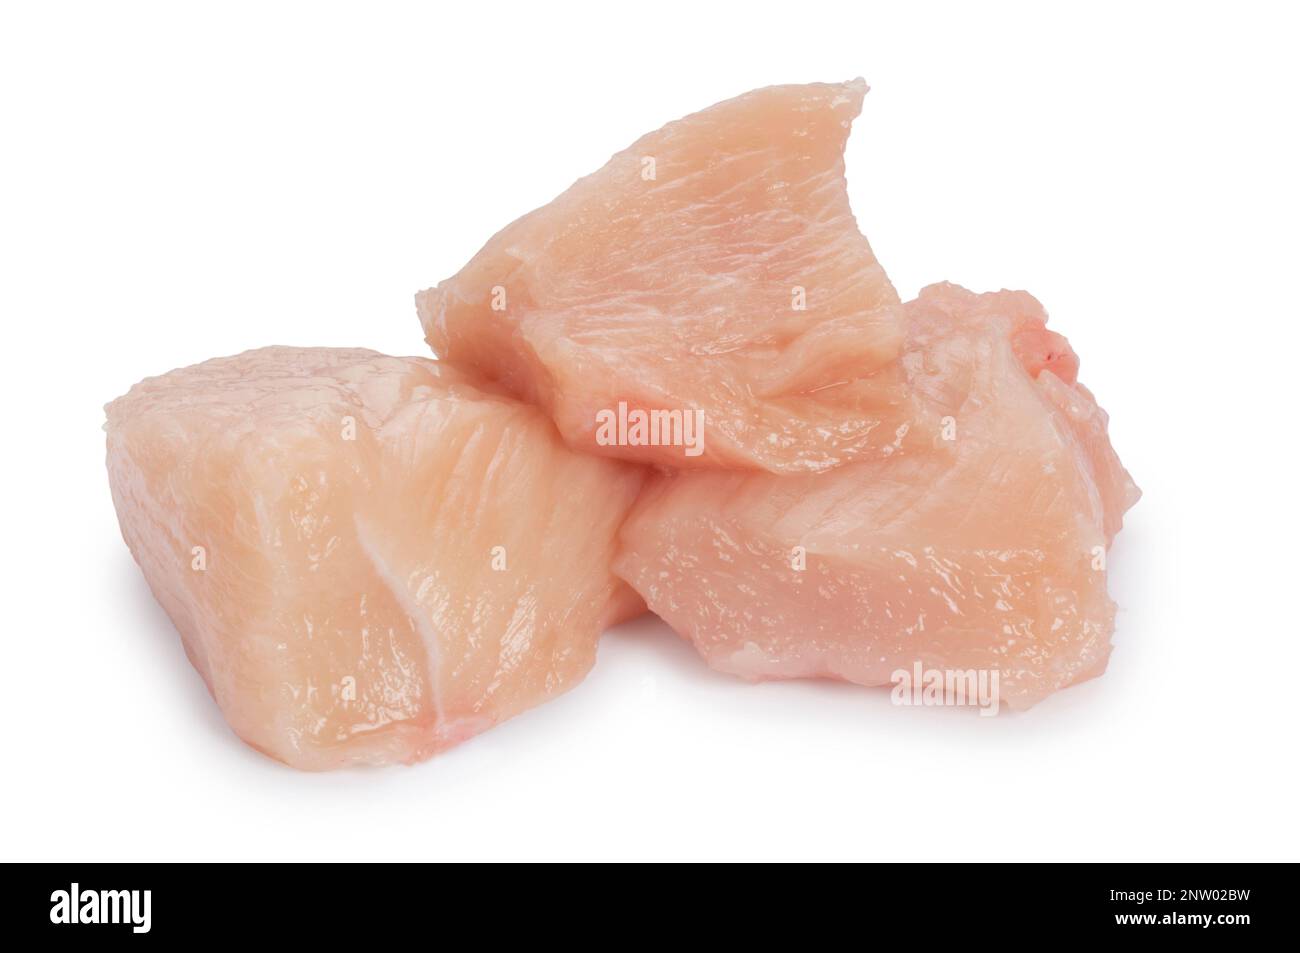 Studio shot of chopped chicken pieces cut out against a white background - John Gollop Stock Photo